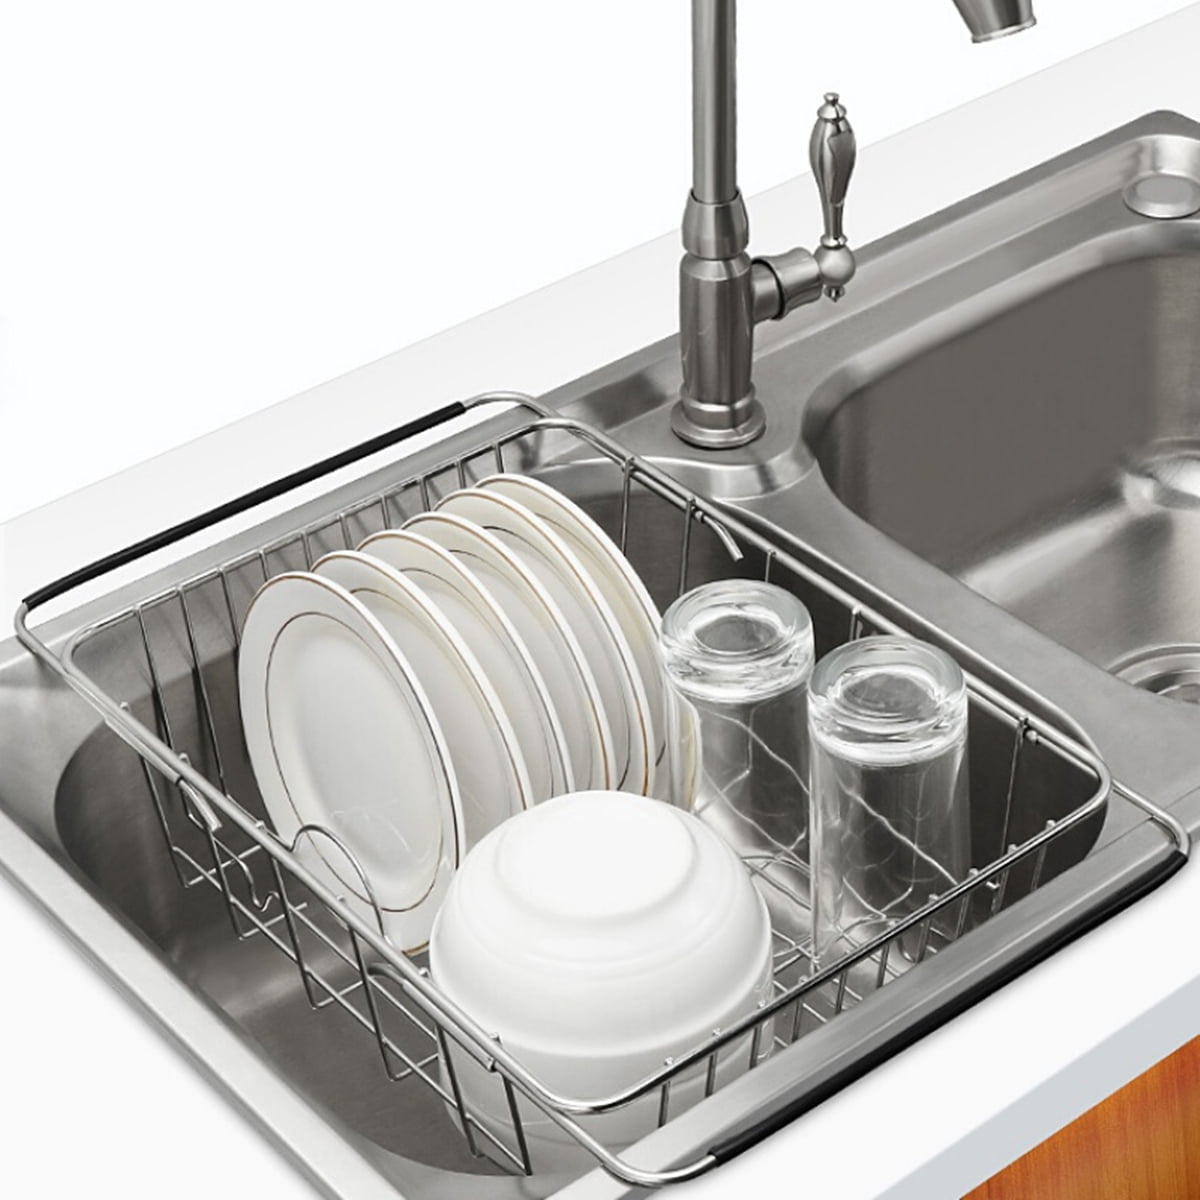 Stainless Steel Adjustable Dish Drying Rack Dish Drainer Storage Holder Over the Sink,In Sink or